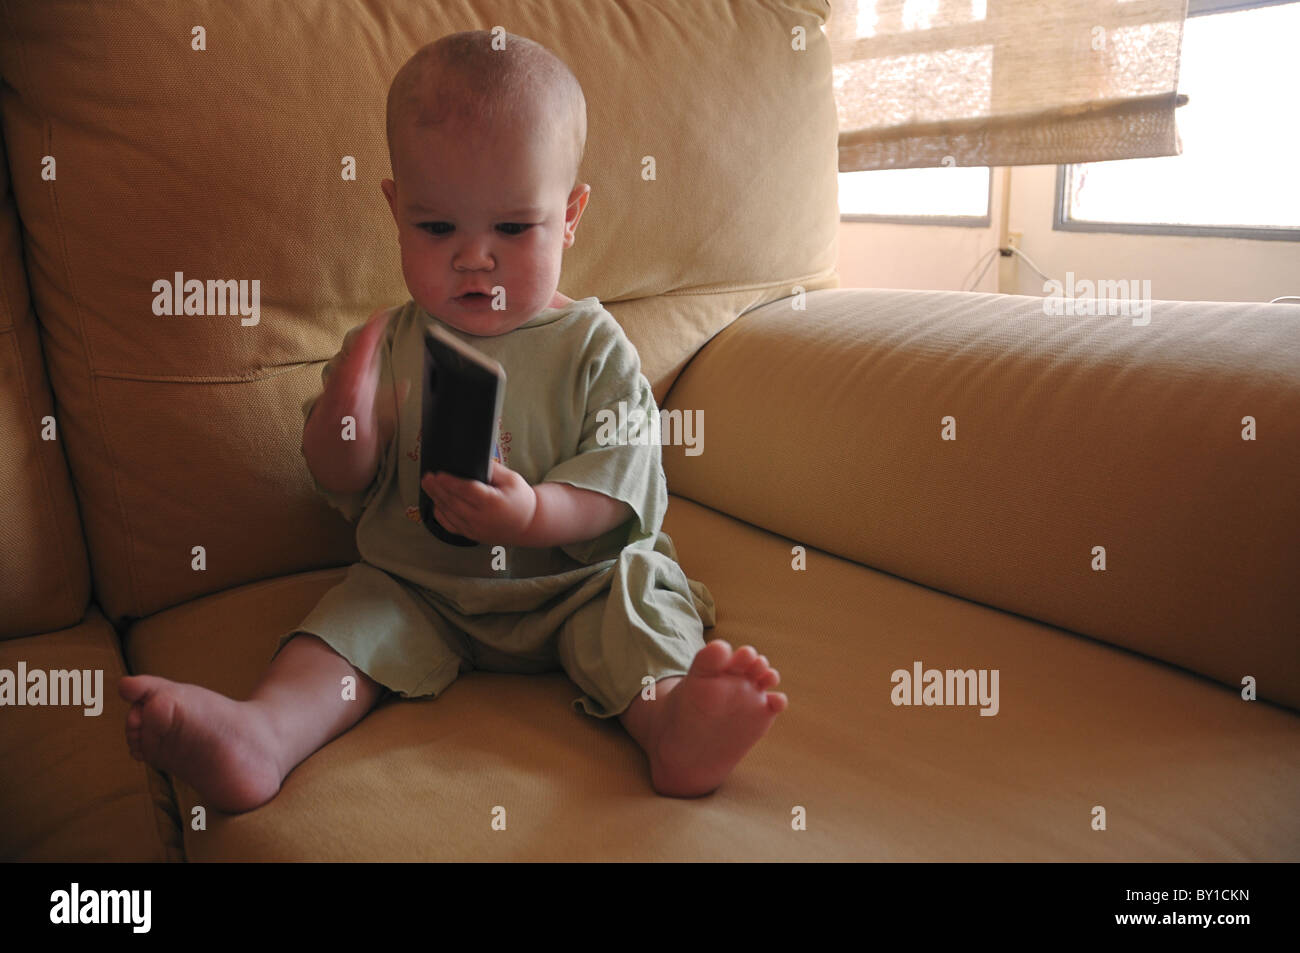 Child playing with a TV remote. Stock Photo